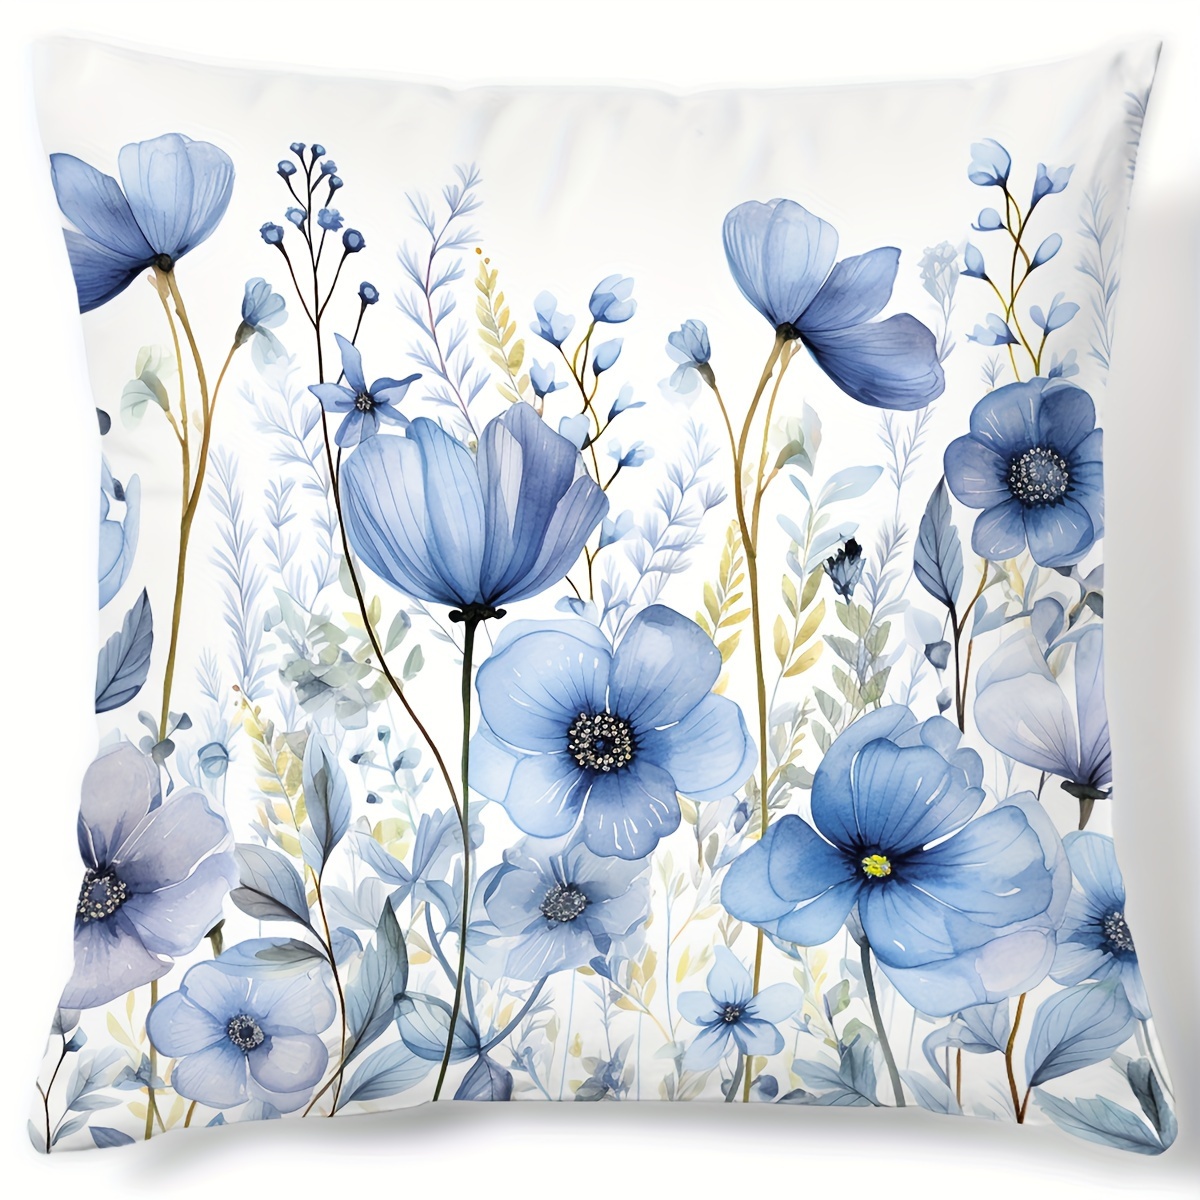 

1pc, Contemporary Style Blue Floral Pattern Digital Print Pillow Cover, Decorative Cushion Case, 18x18 Inches, Zippered, Home Decor